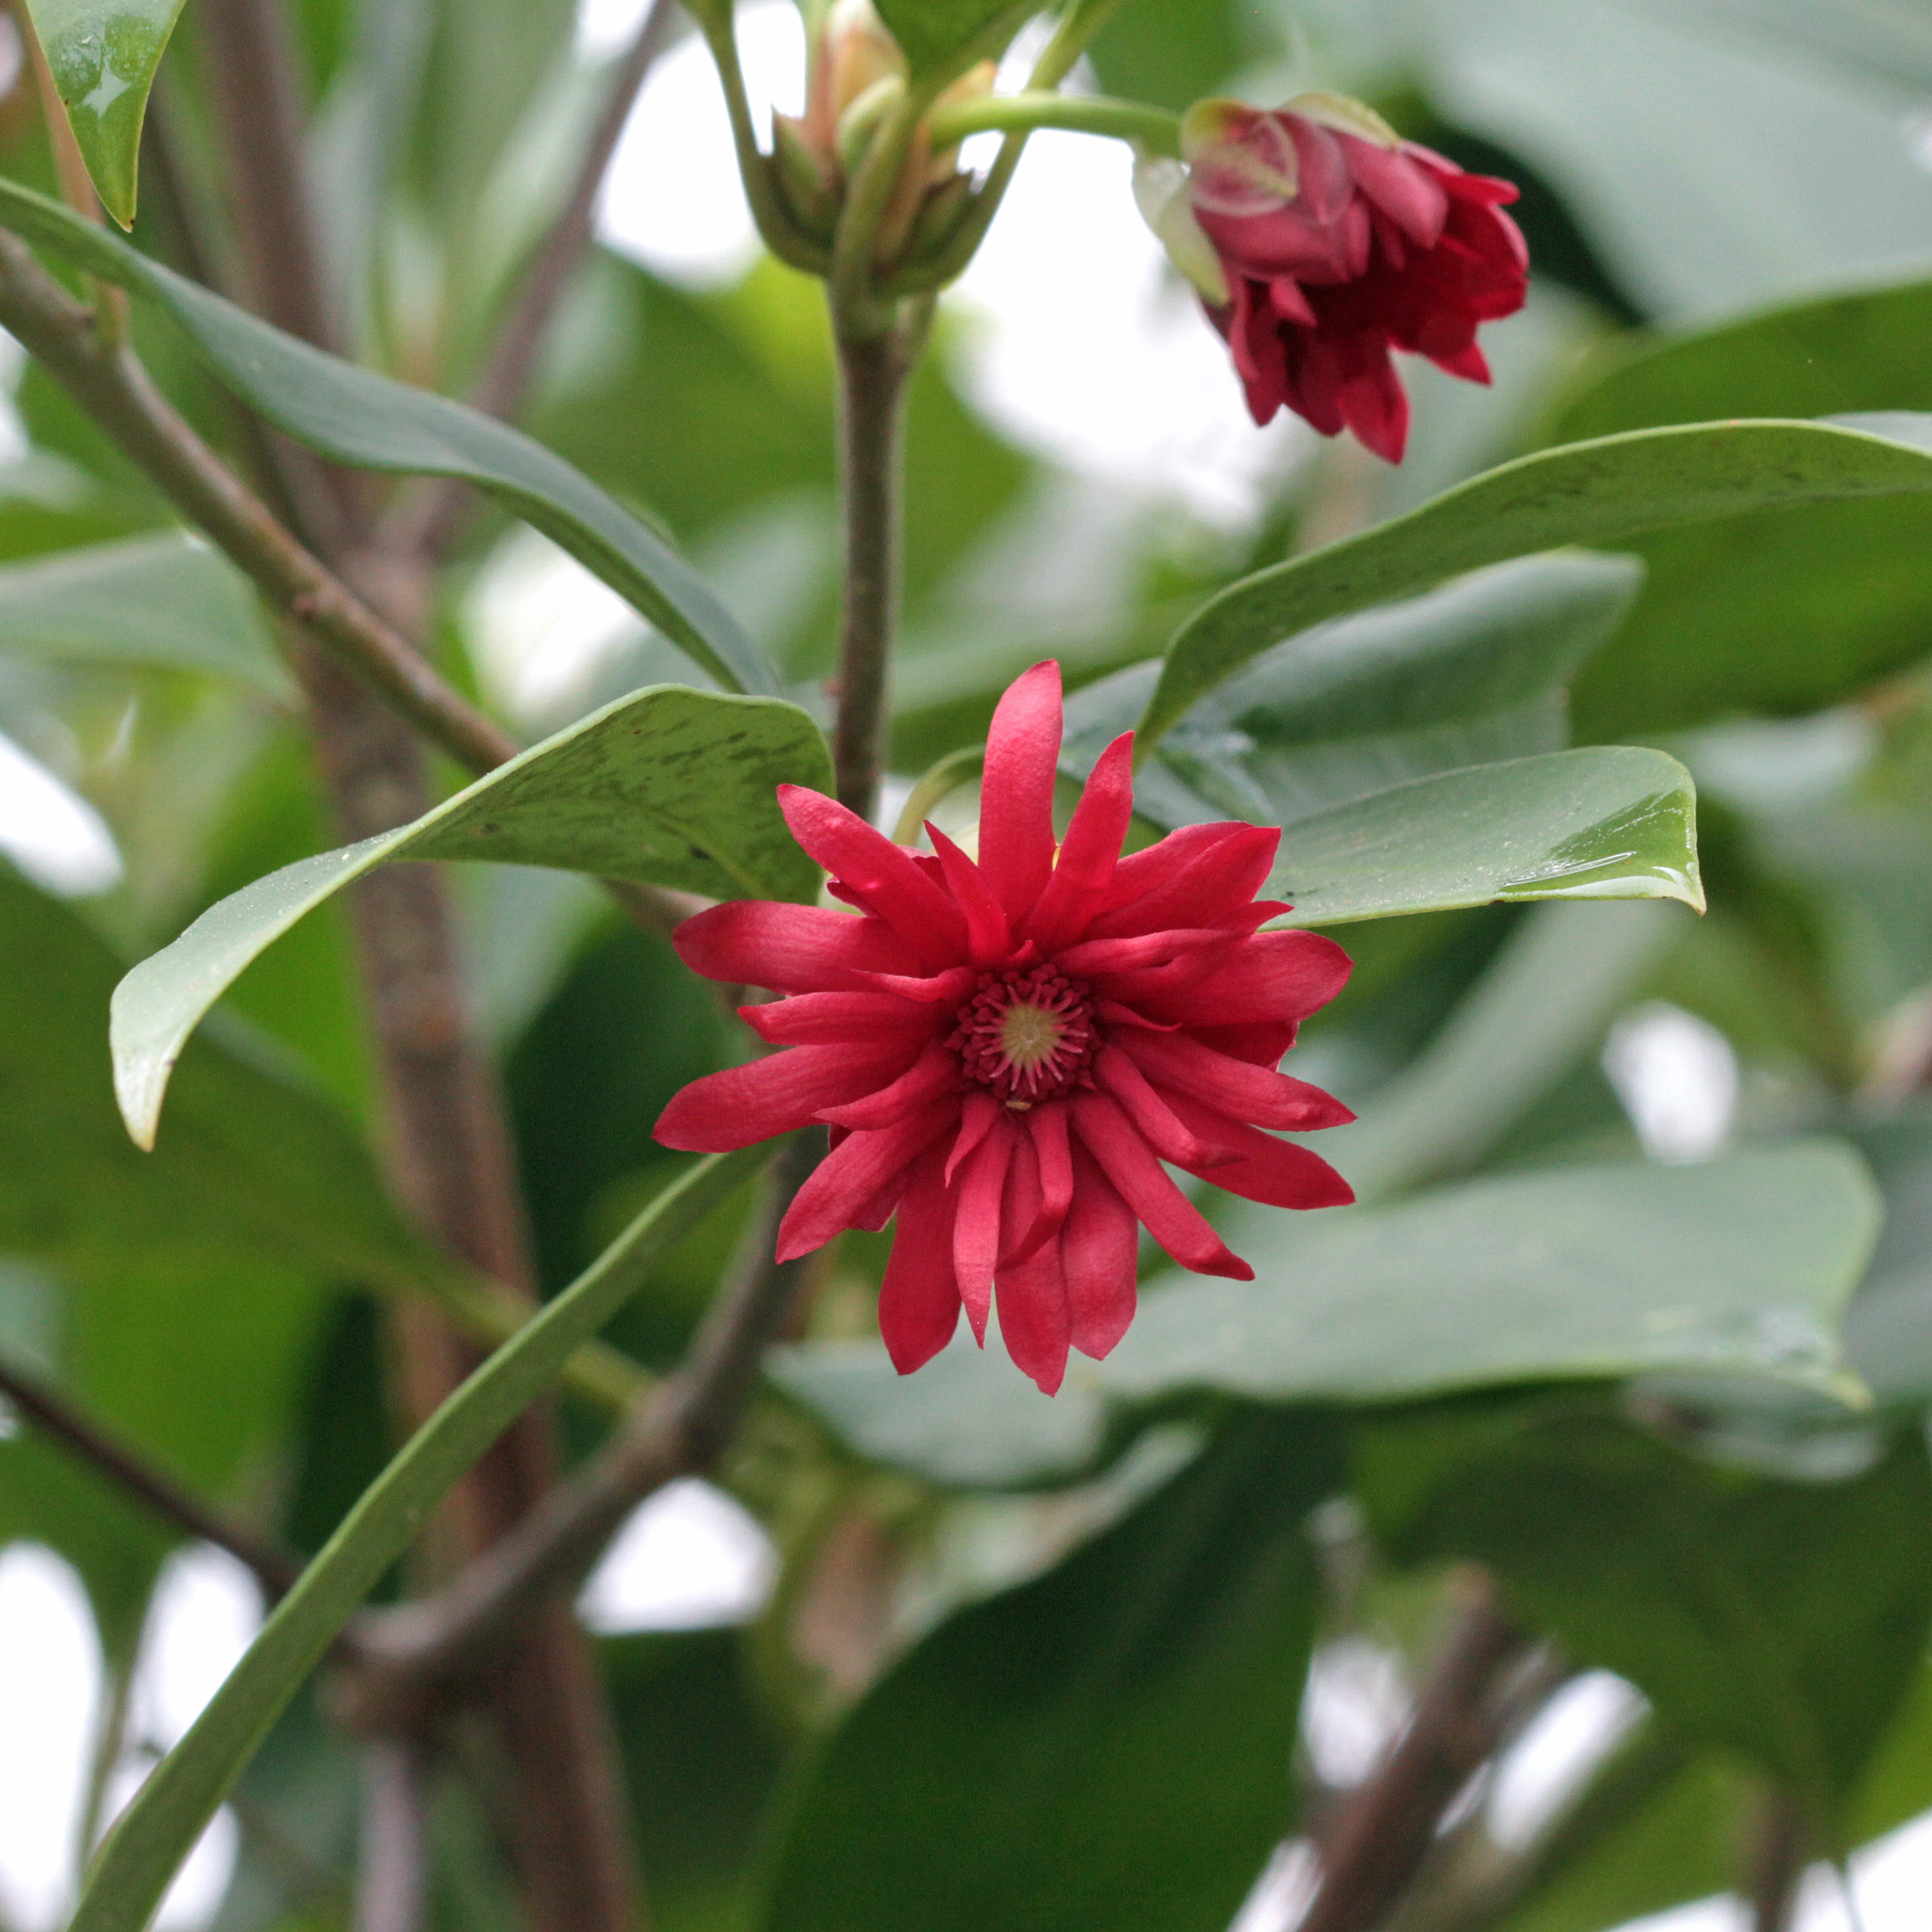 The Scientific Name is Illicium floridanum. You will likely hear them called Florida Anisetree, Anise Tree, Florida Star-anise. This picture shows the Distinctive star-shaped crimson blossoms develop in leaf axils in early spring. of Illicium floridanum